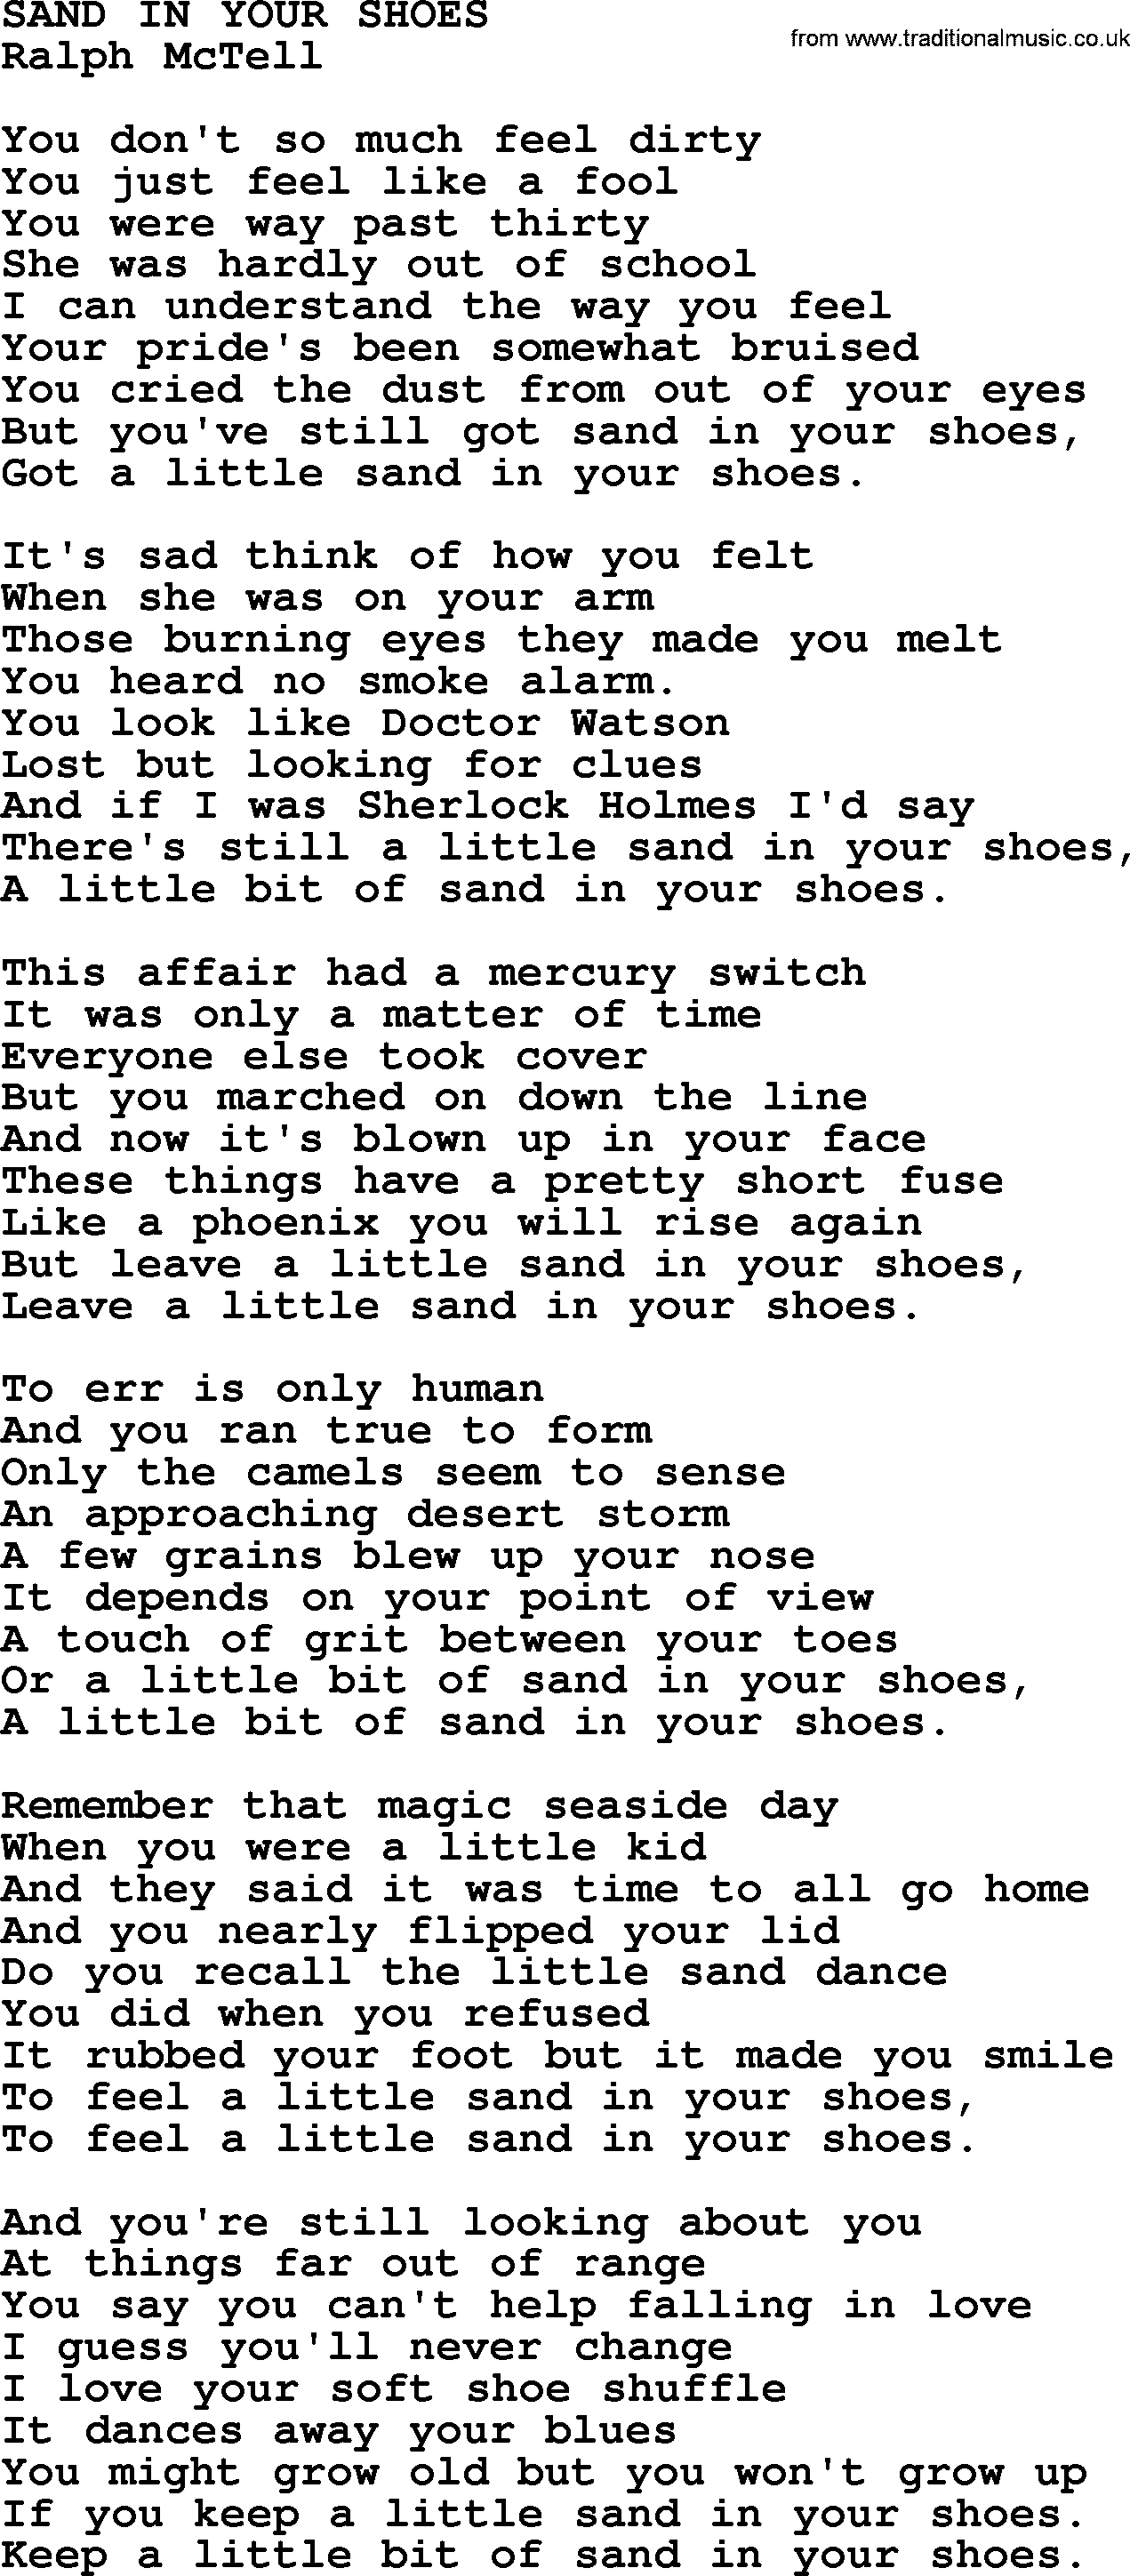 Sand In Your  - by Ralph McTell lyrics and chords